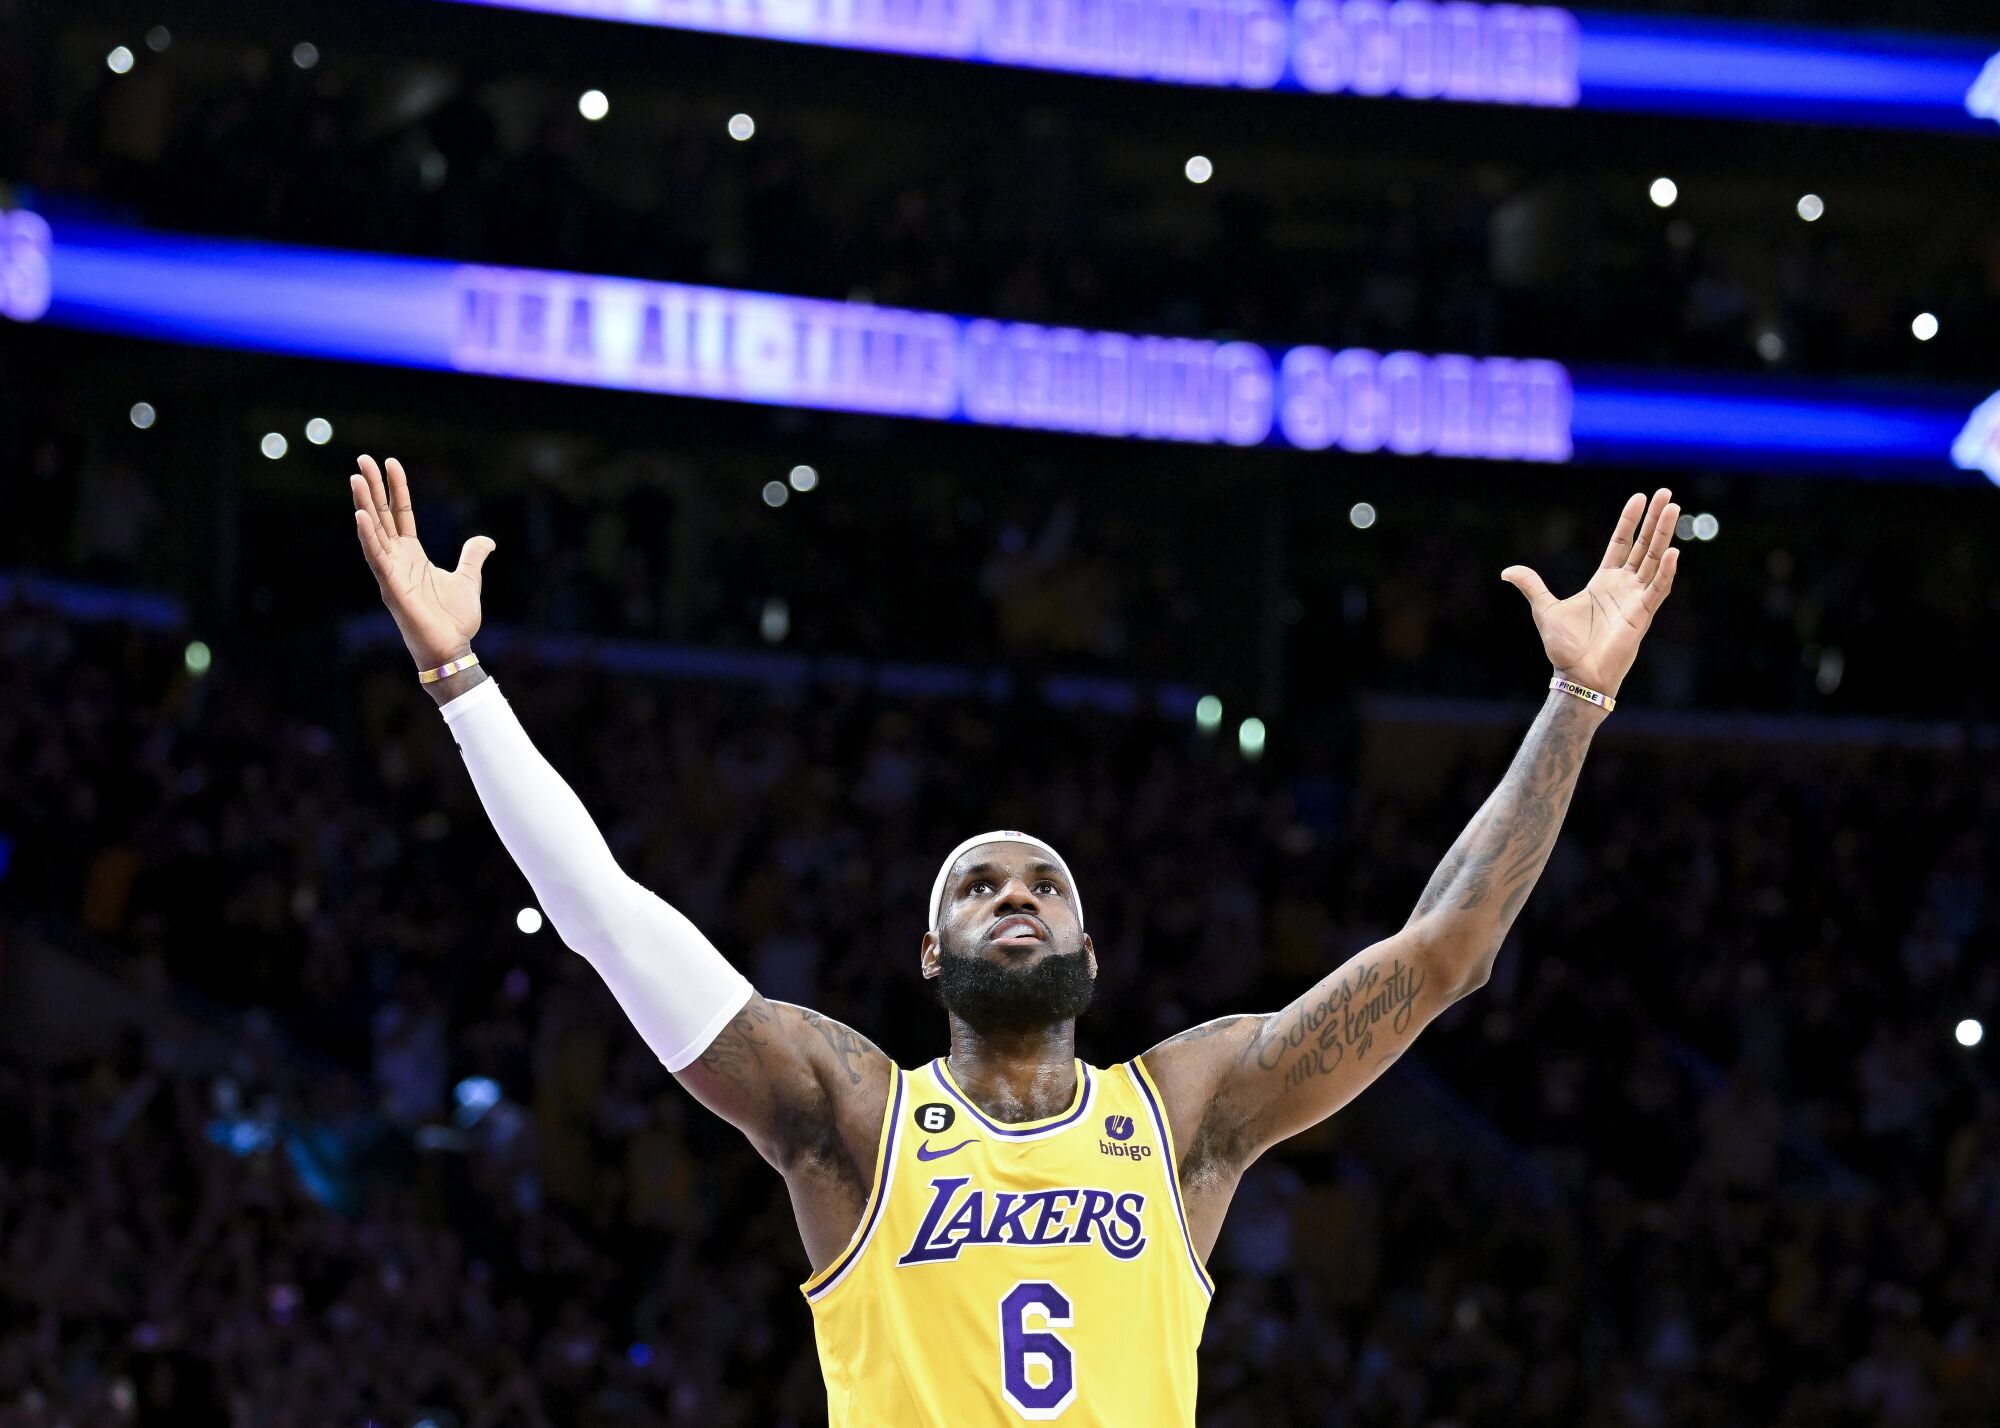 LeBron James raises his arms wide in celebration, looking upward.